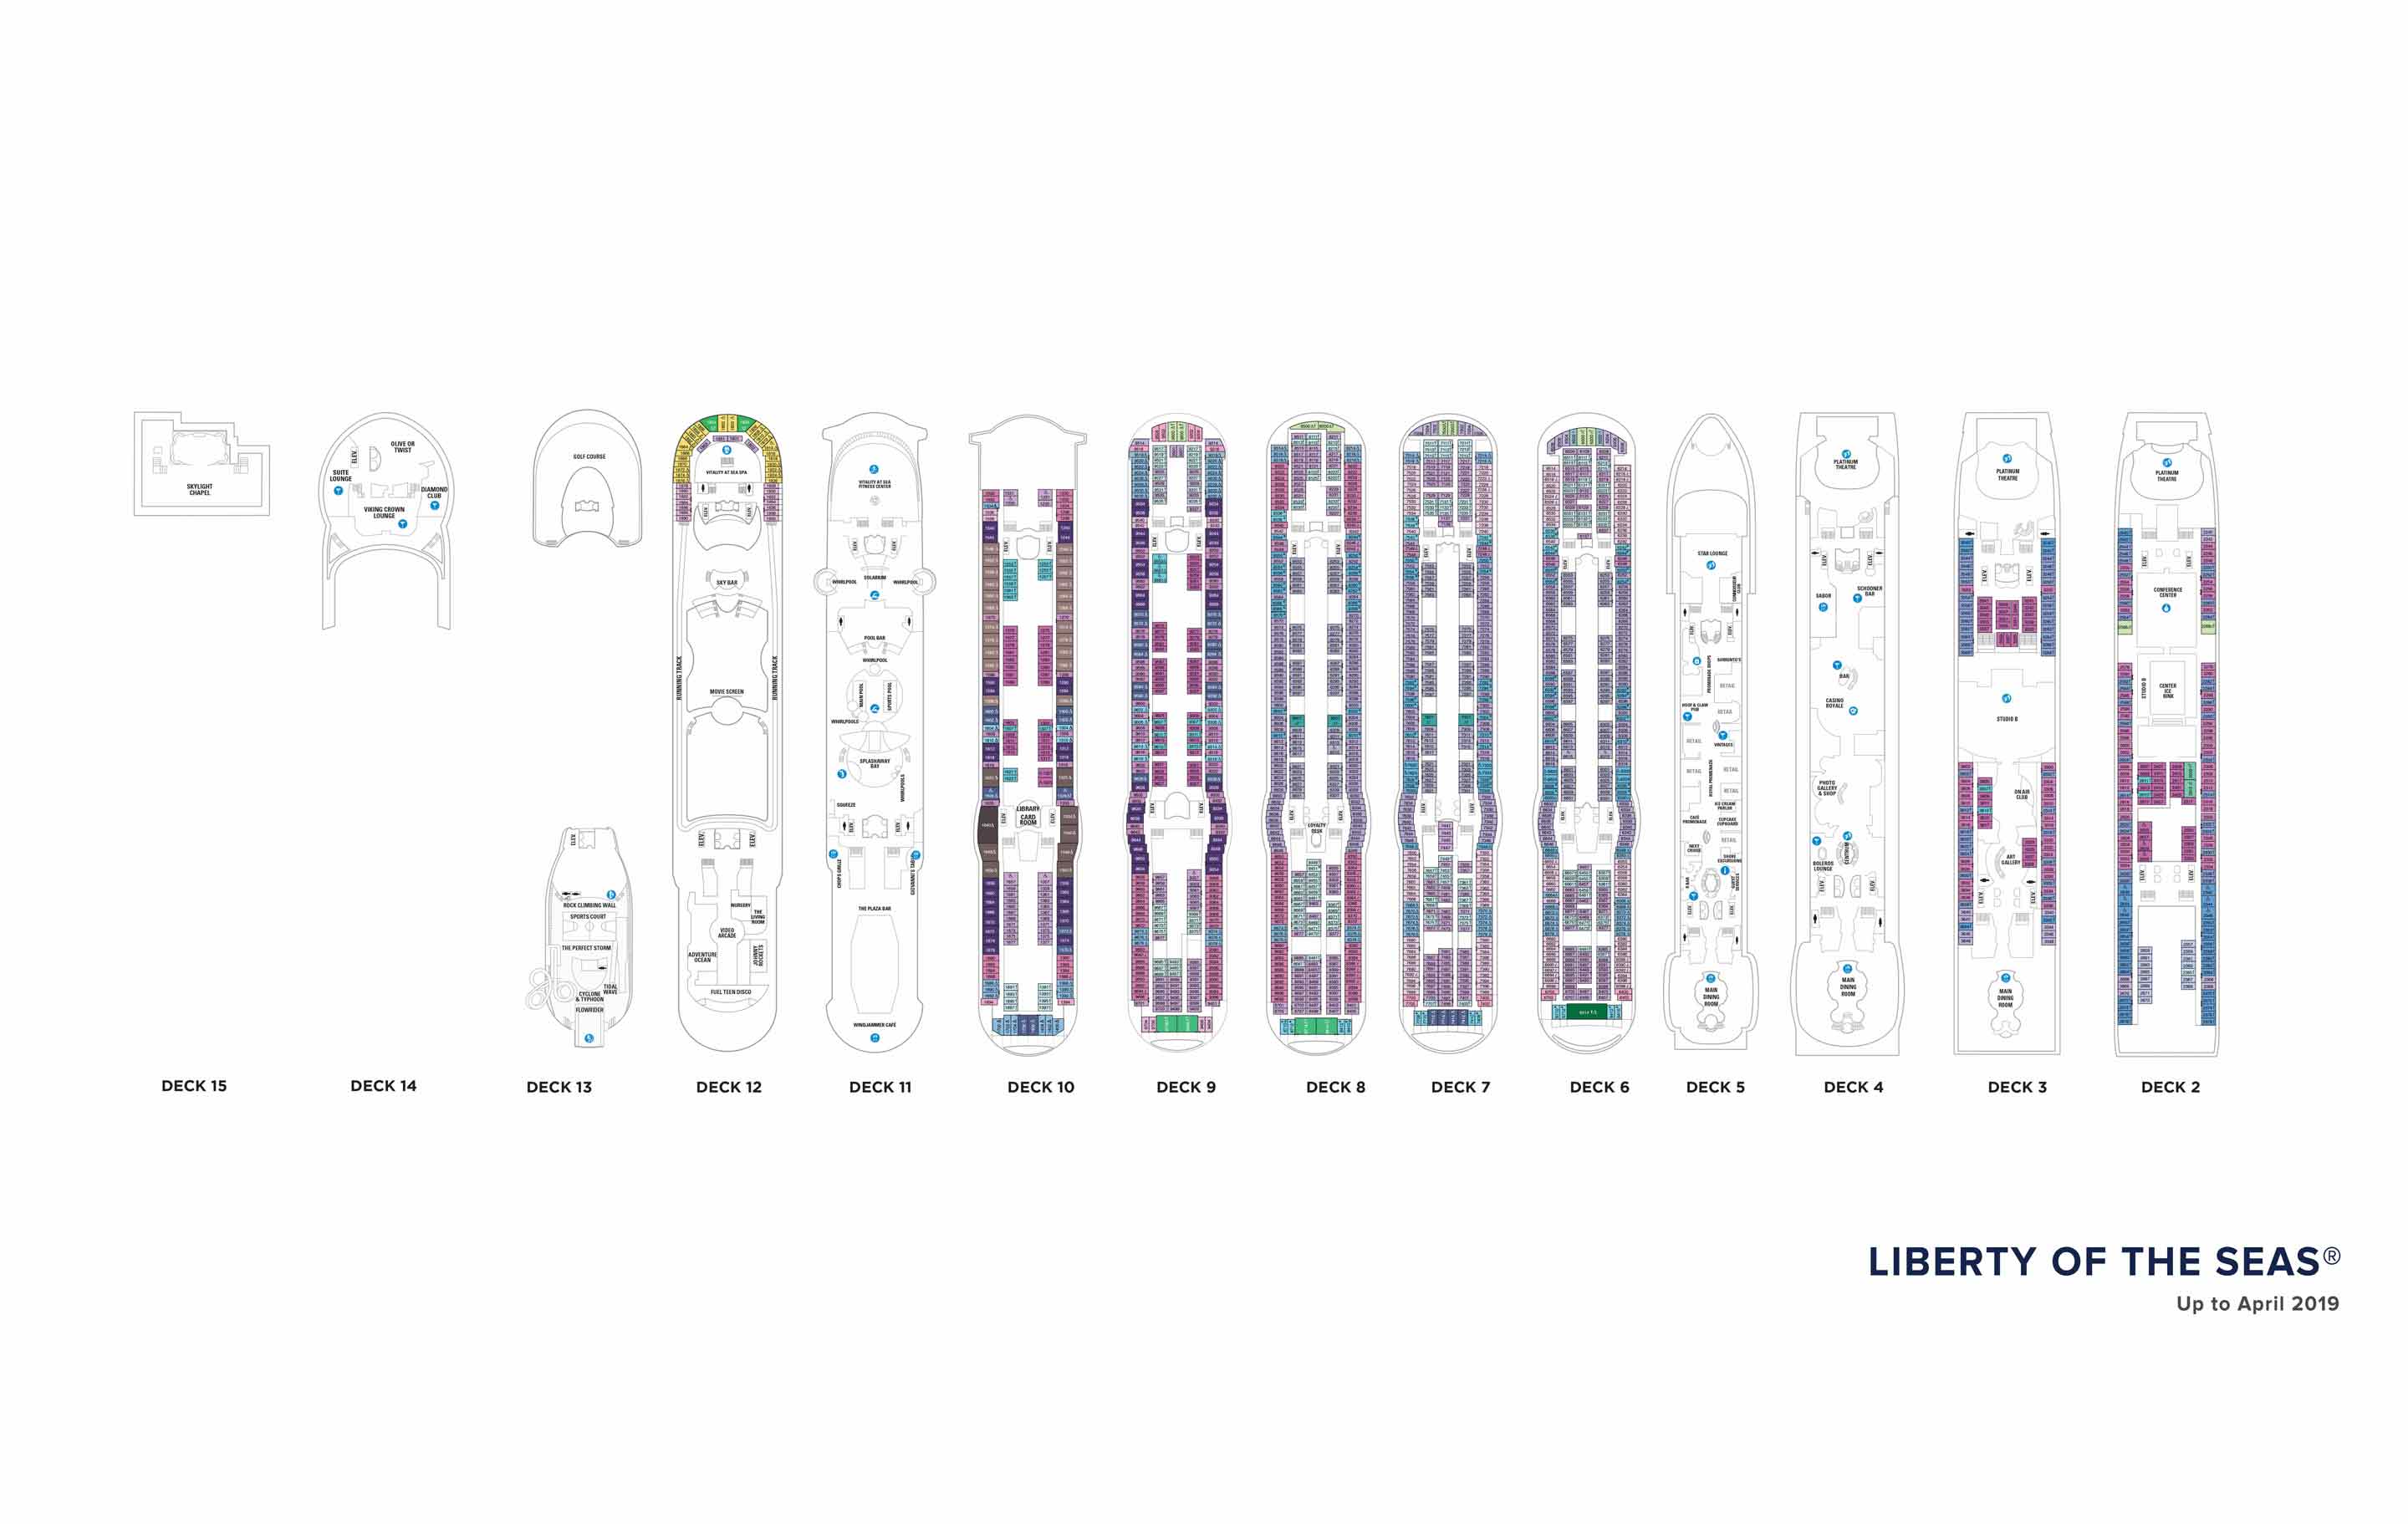 The deck plans for Liberty of the Seas, Royal Caribbean Cruises